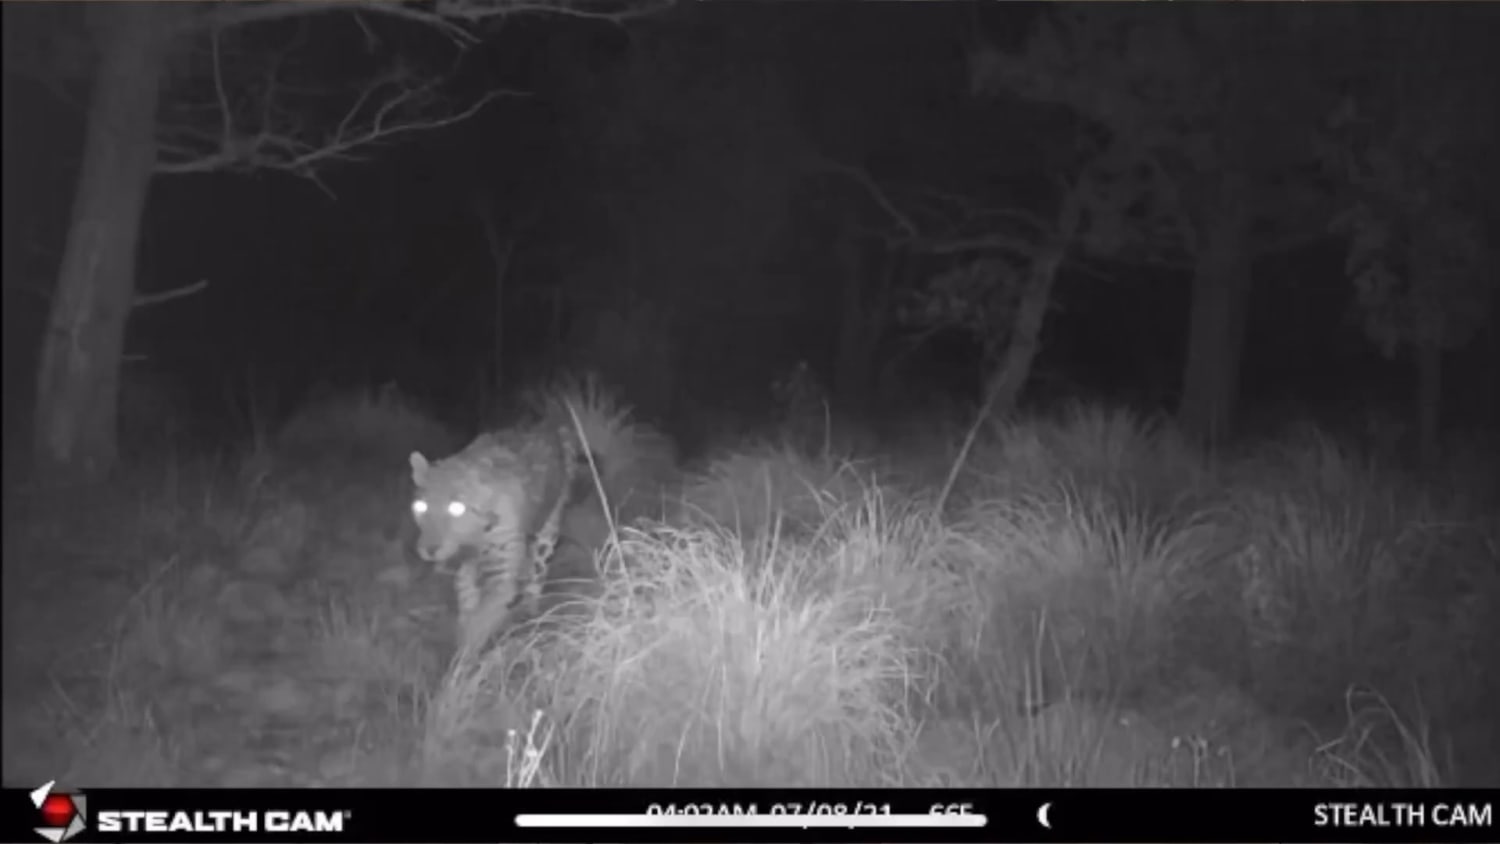 This footage from last August shows Sombra, the only jaguar currently known from the US, roaming the wilds of Arizona.